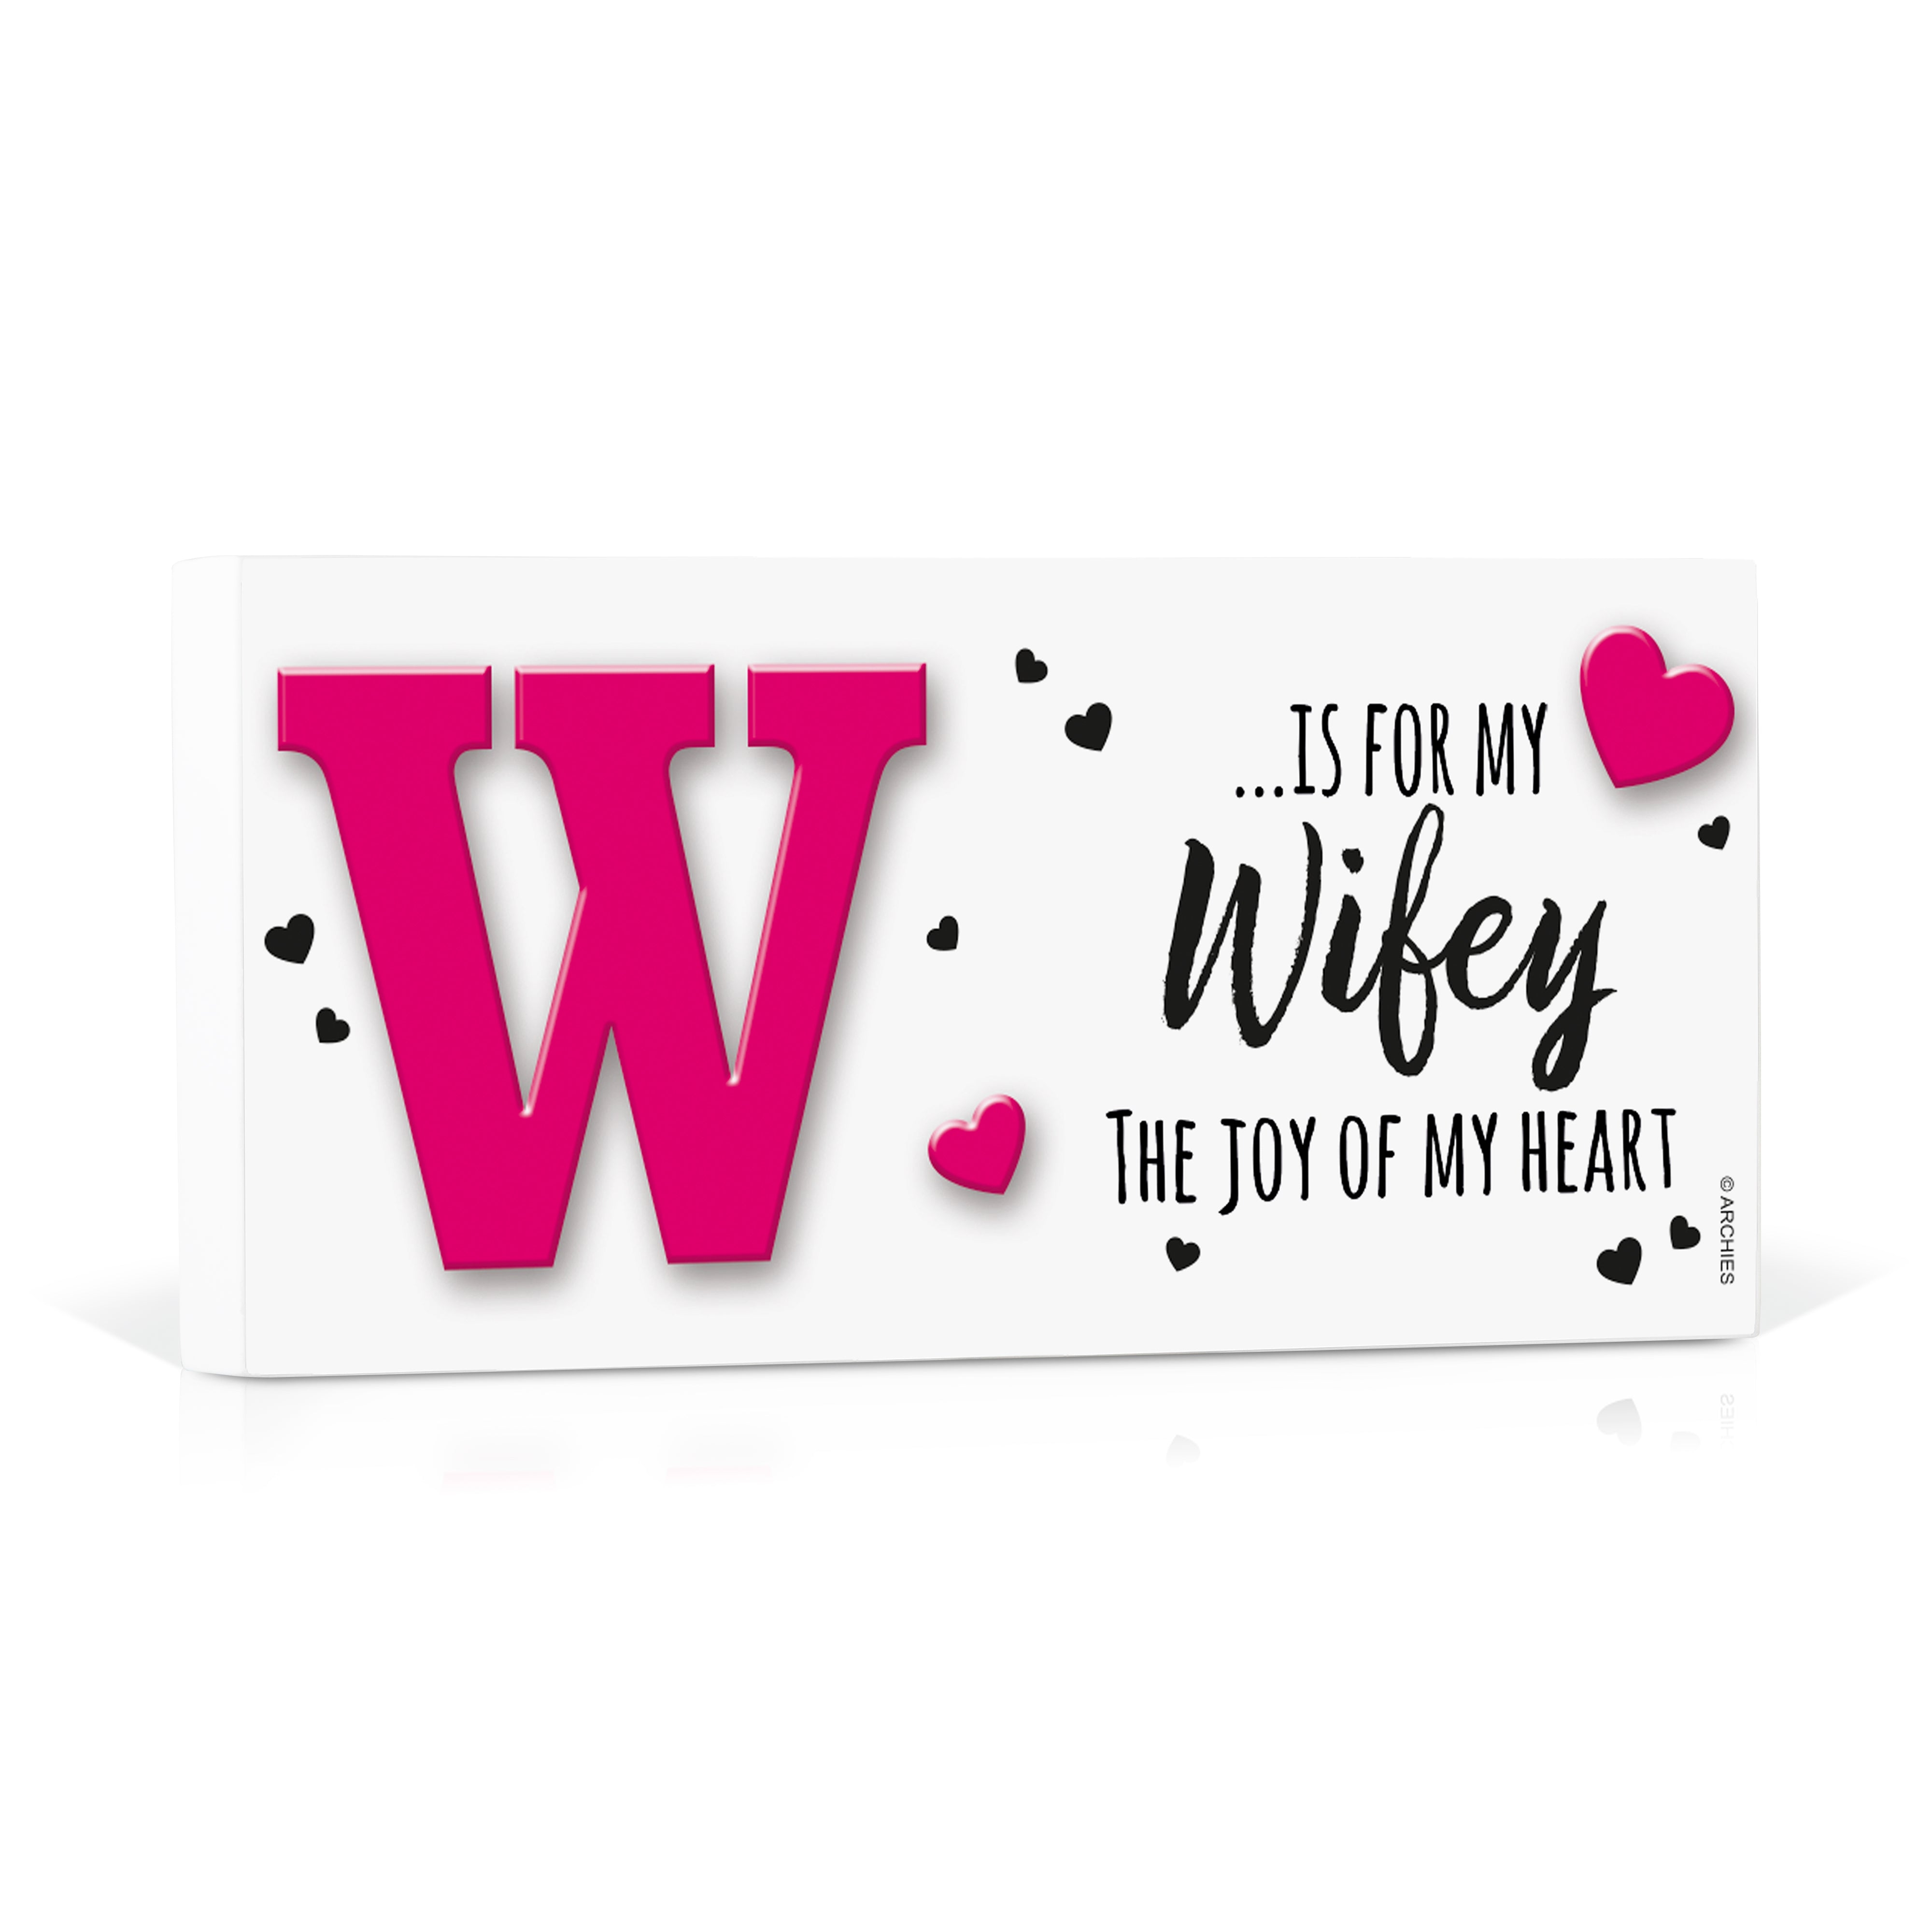 Archies | Archies KEEP SAKE Wife Gift Combo with Ceramic Mug and Elevated Initial Quotation - with a FREE GREETING CARD 4